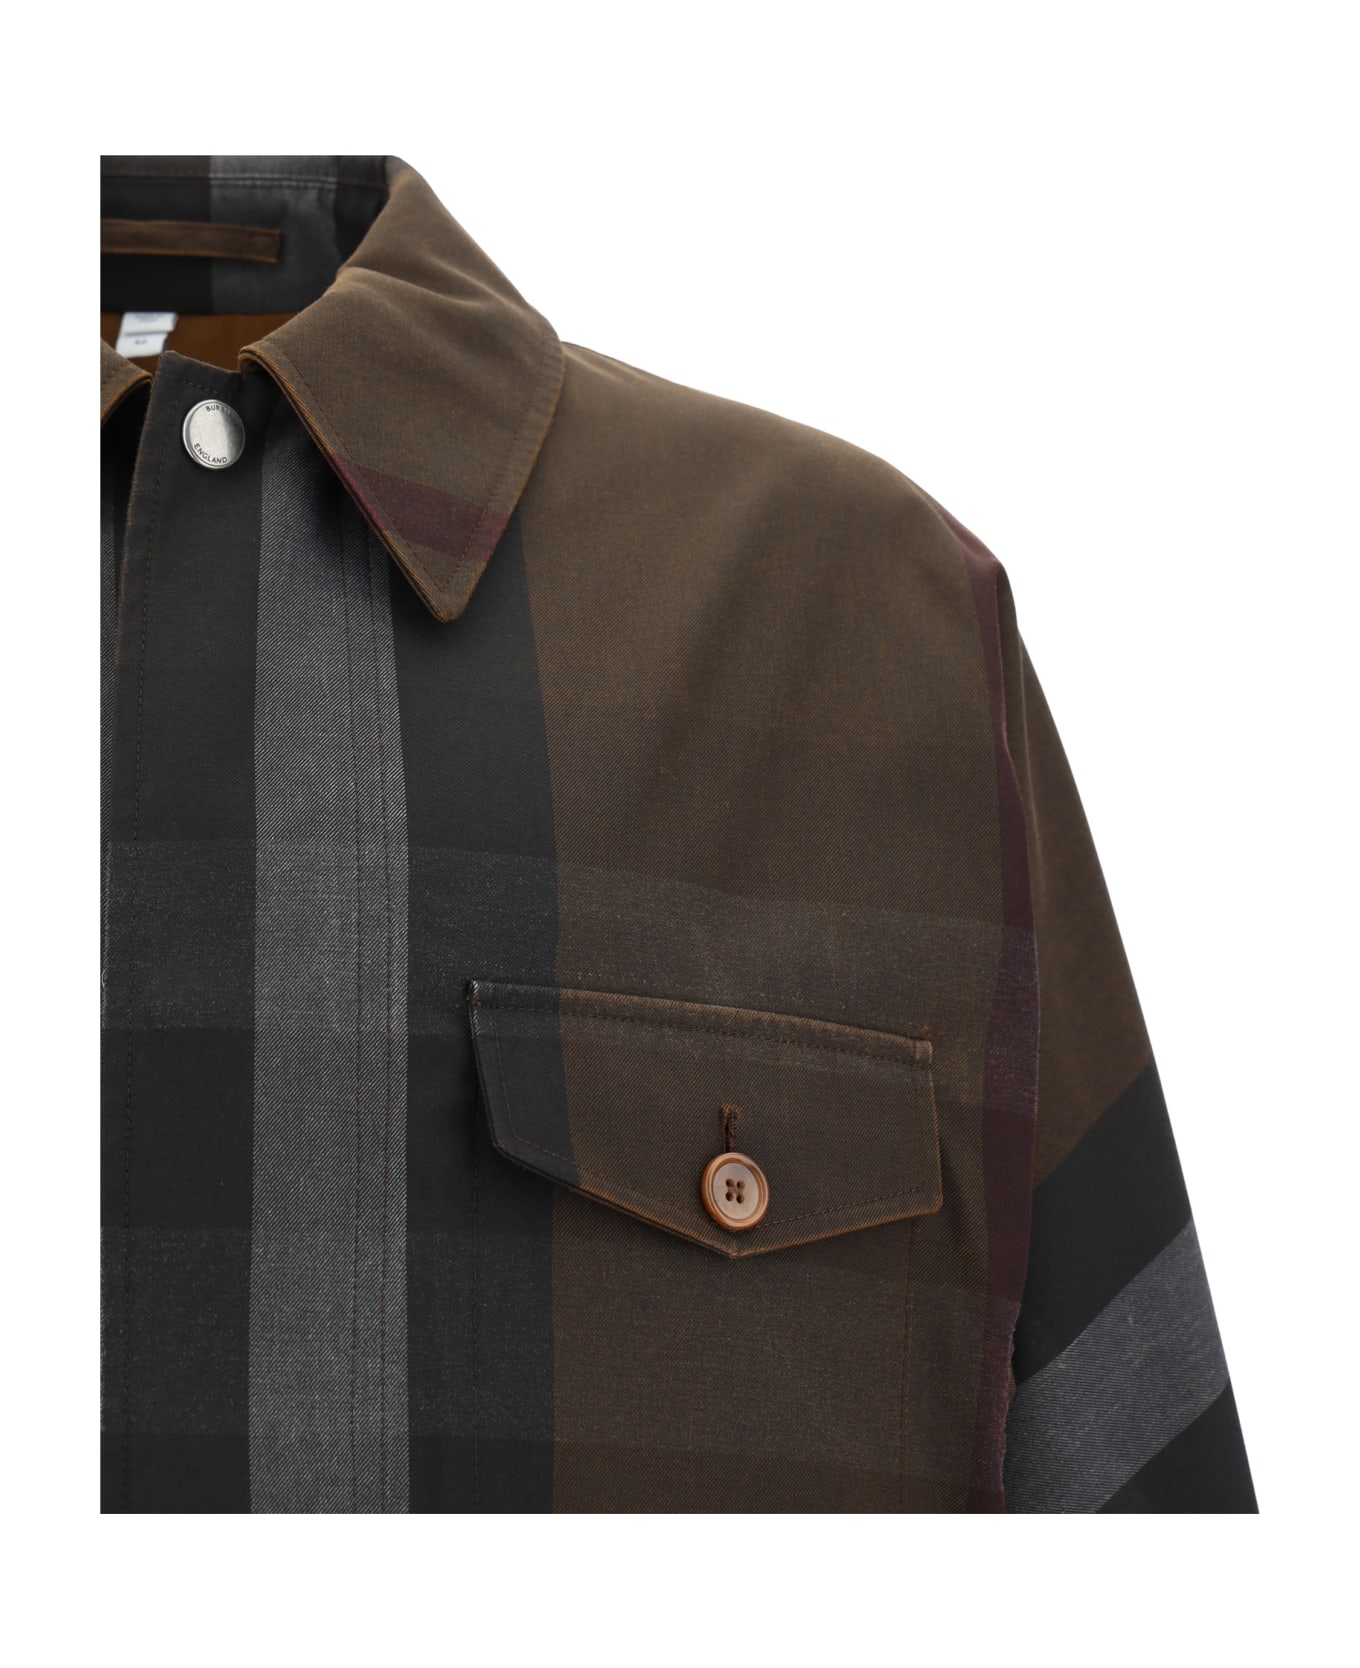 Burberry Field Check Jacket - Brown ジャケット